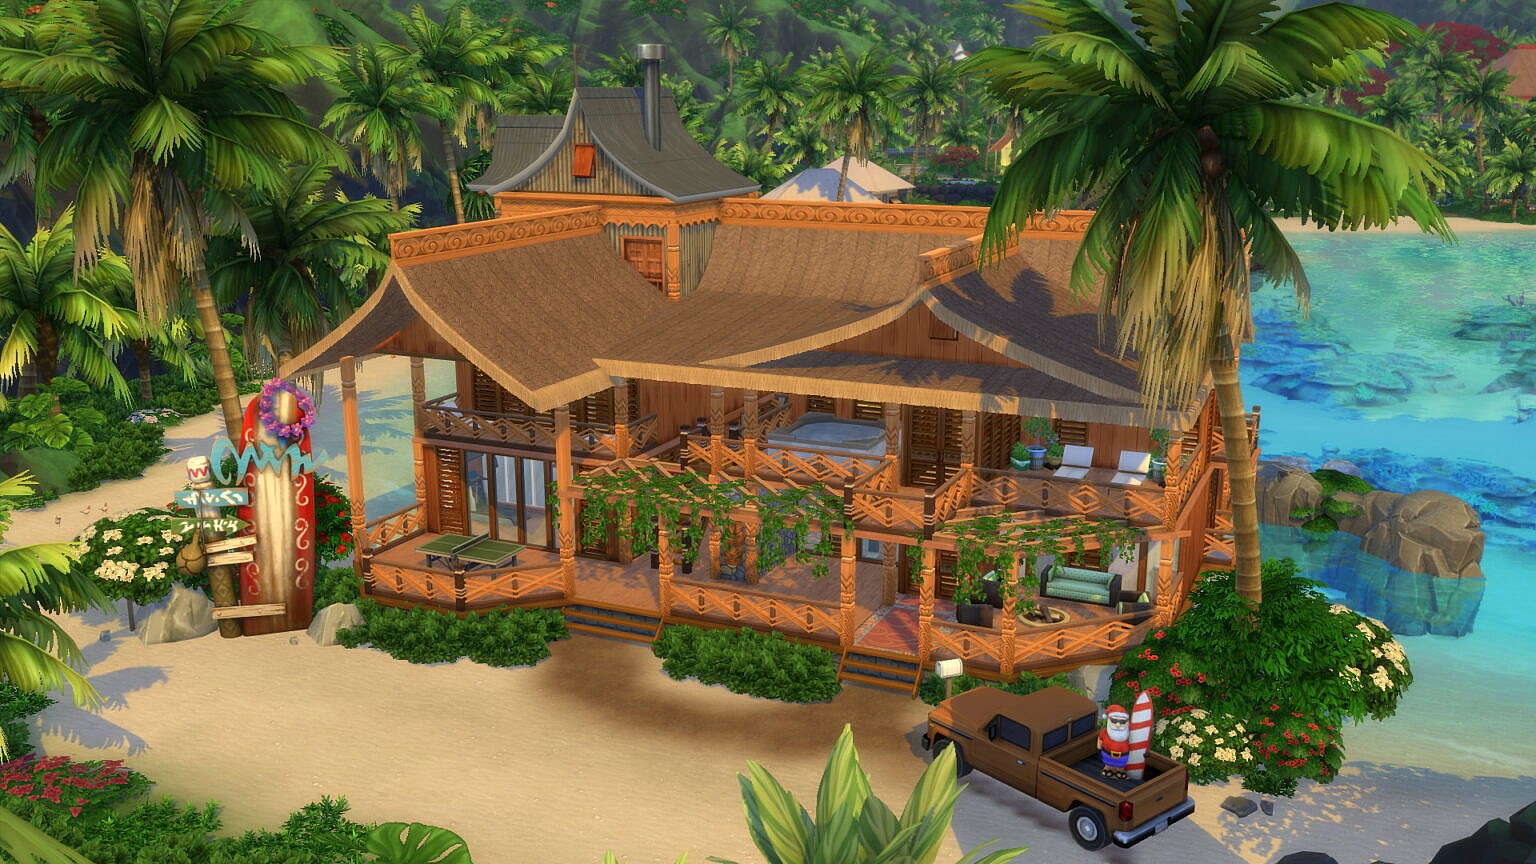 Tropical Getaway Vacation Home By Bradybrad7 At Mod The Sims 4 Sims 4